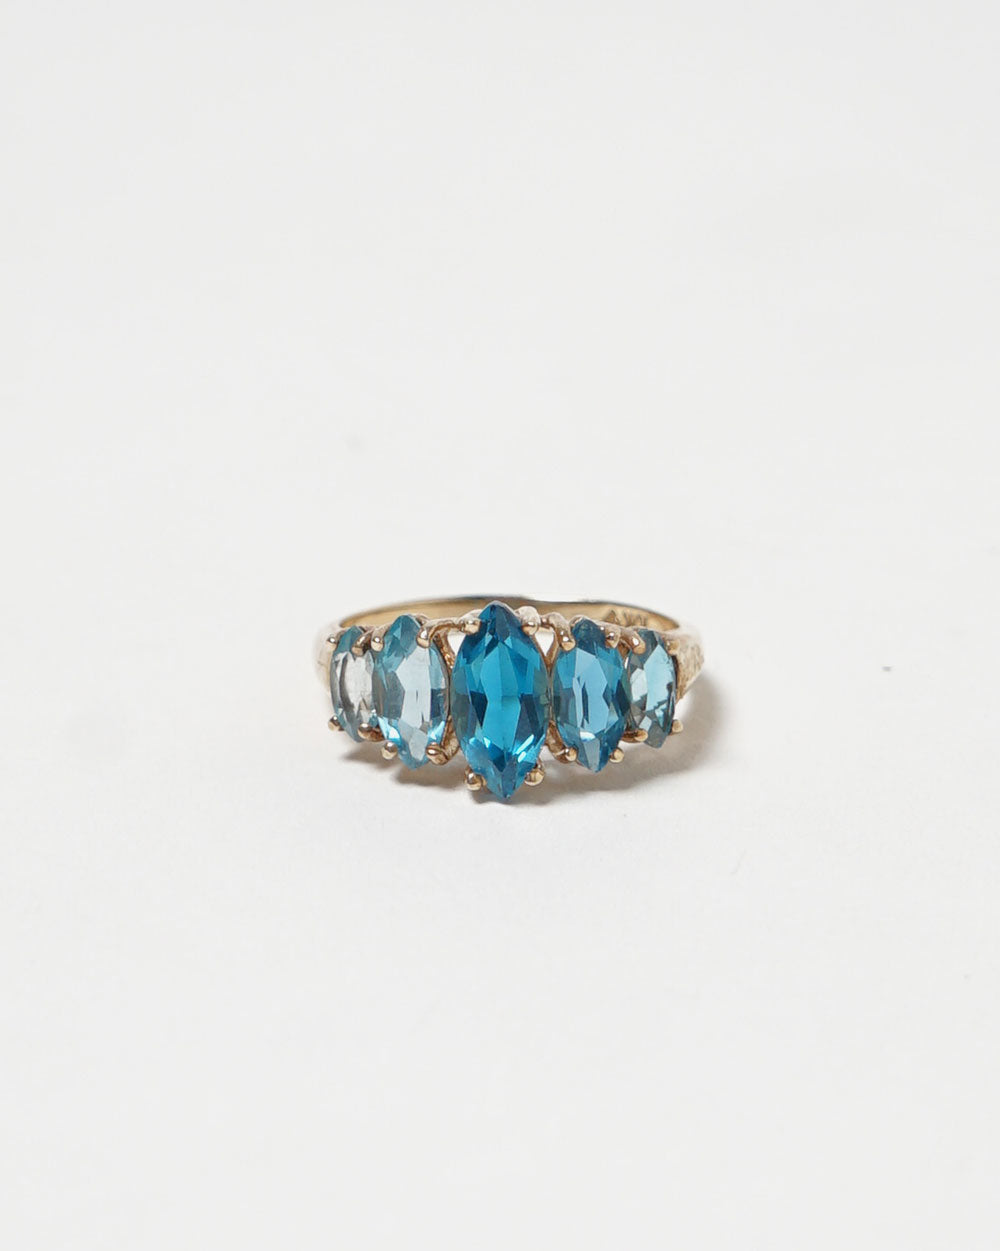 10k Gold Ring w/ Blue Topars / size: 7.75